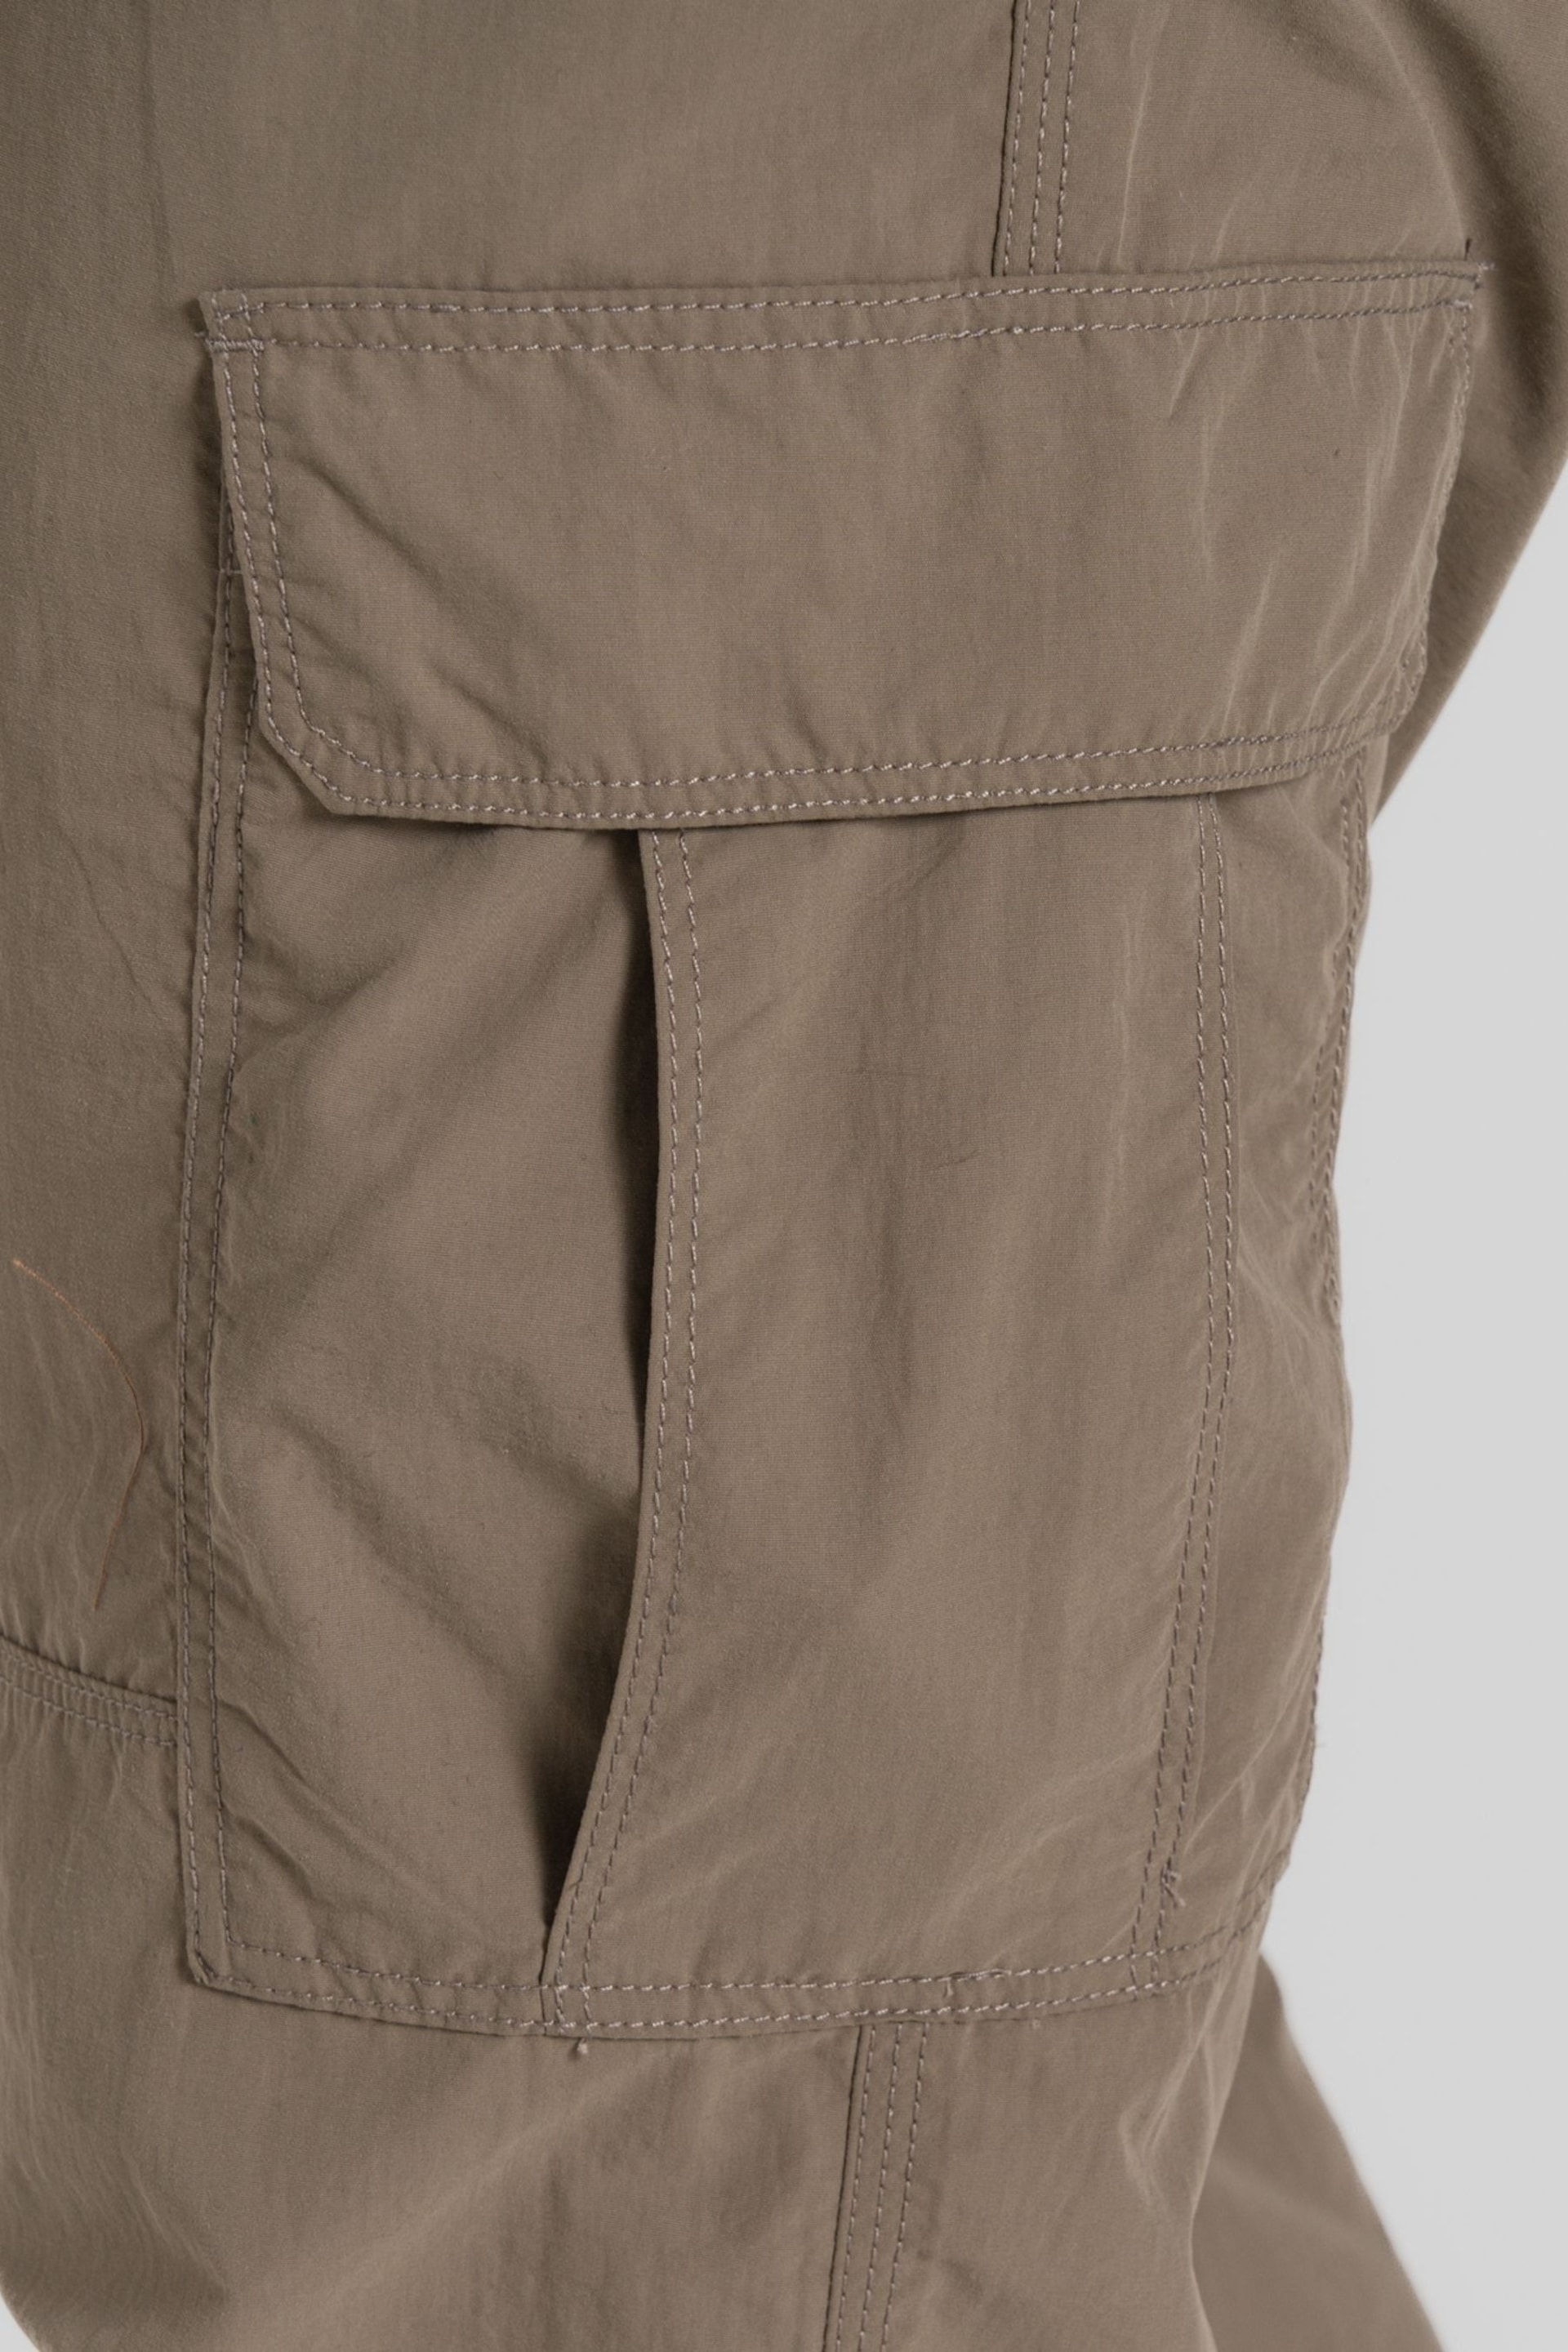 Craghoppers Natuiral Nosilife Cargo Trousers - Image 7 of 7